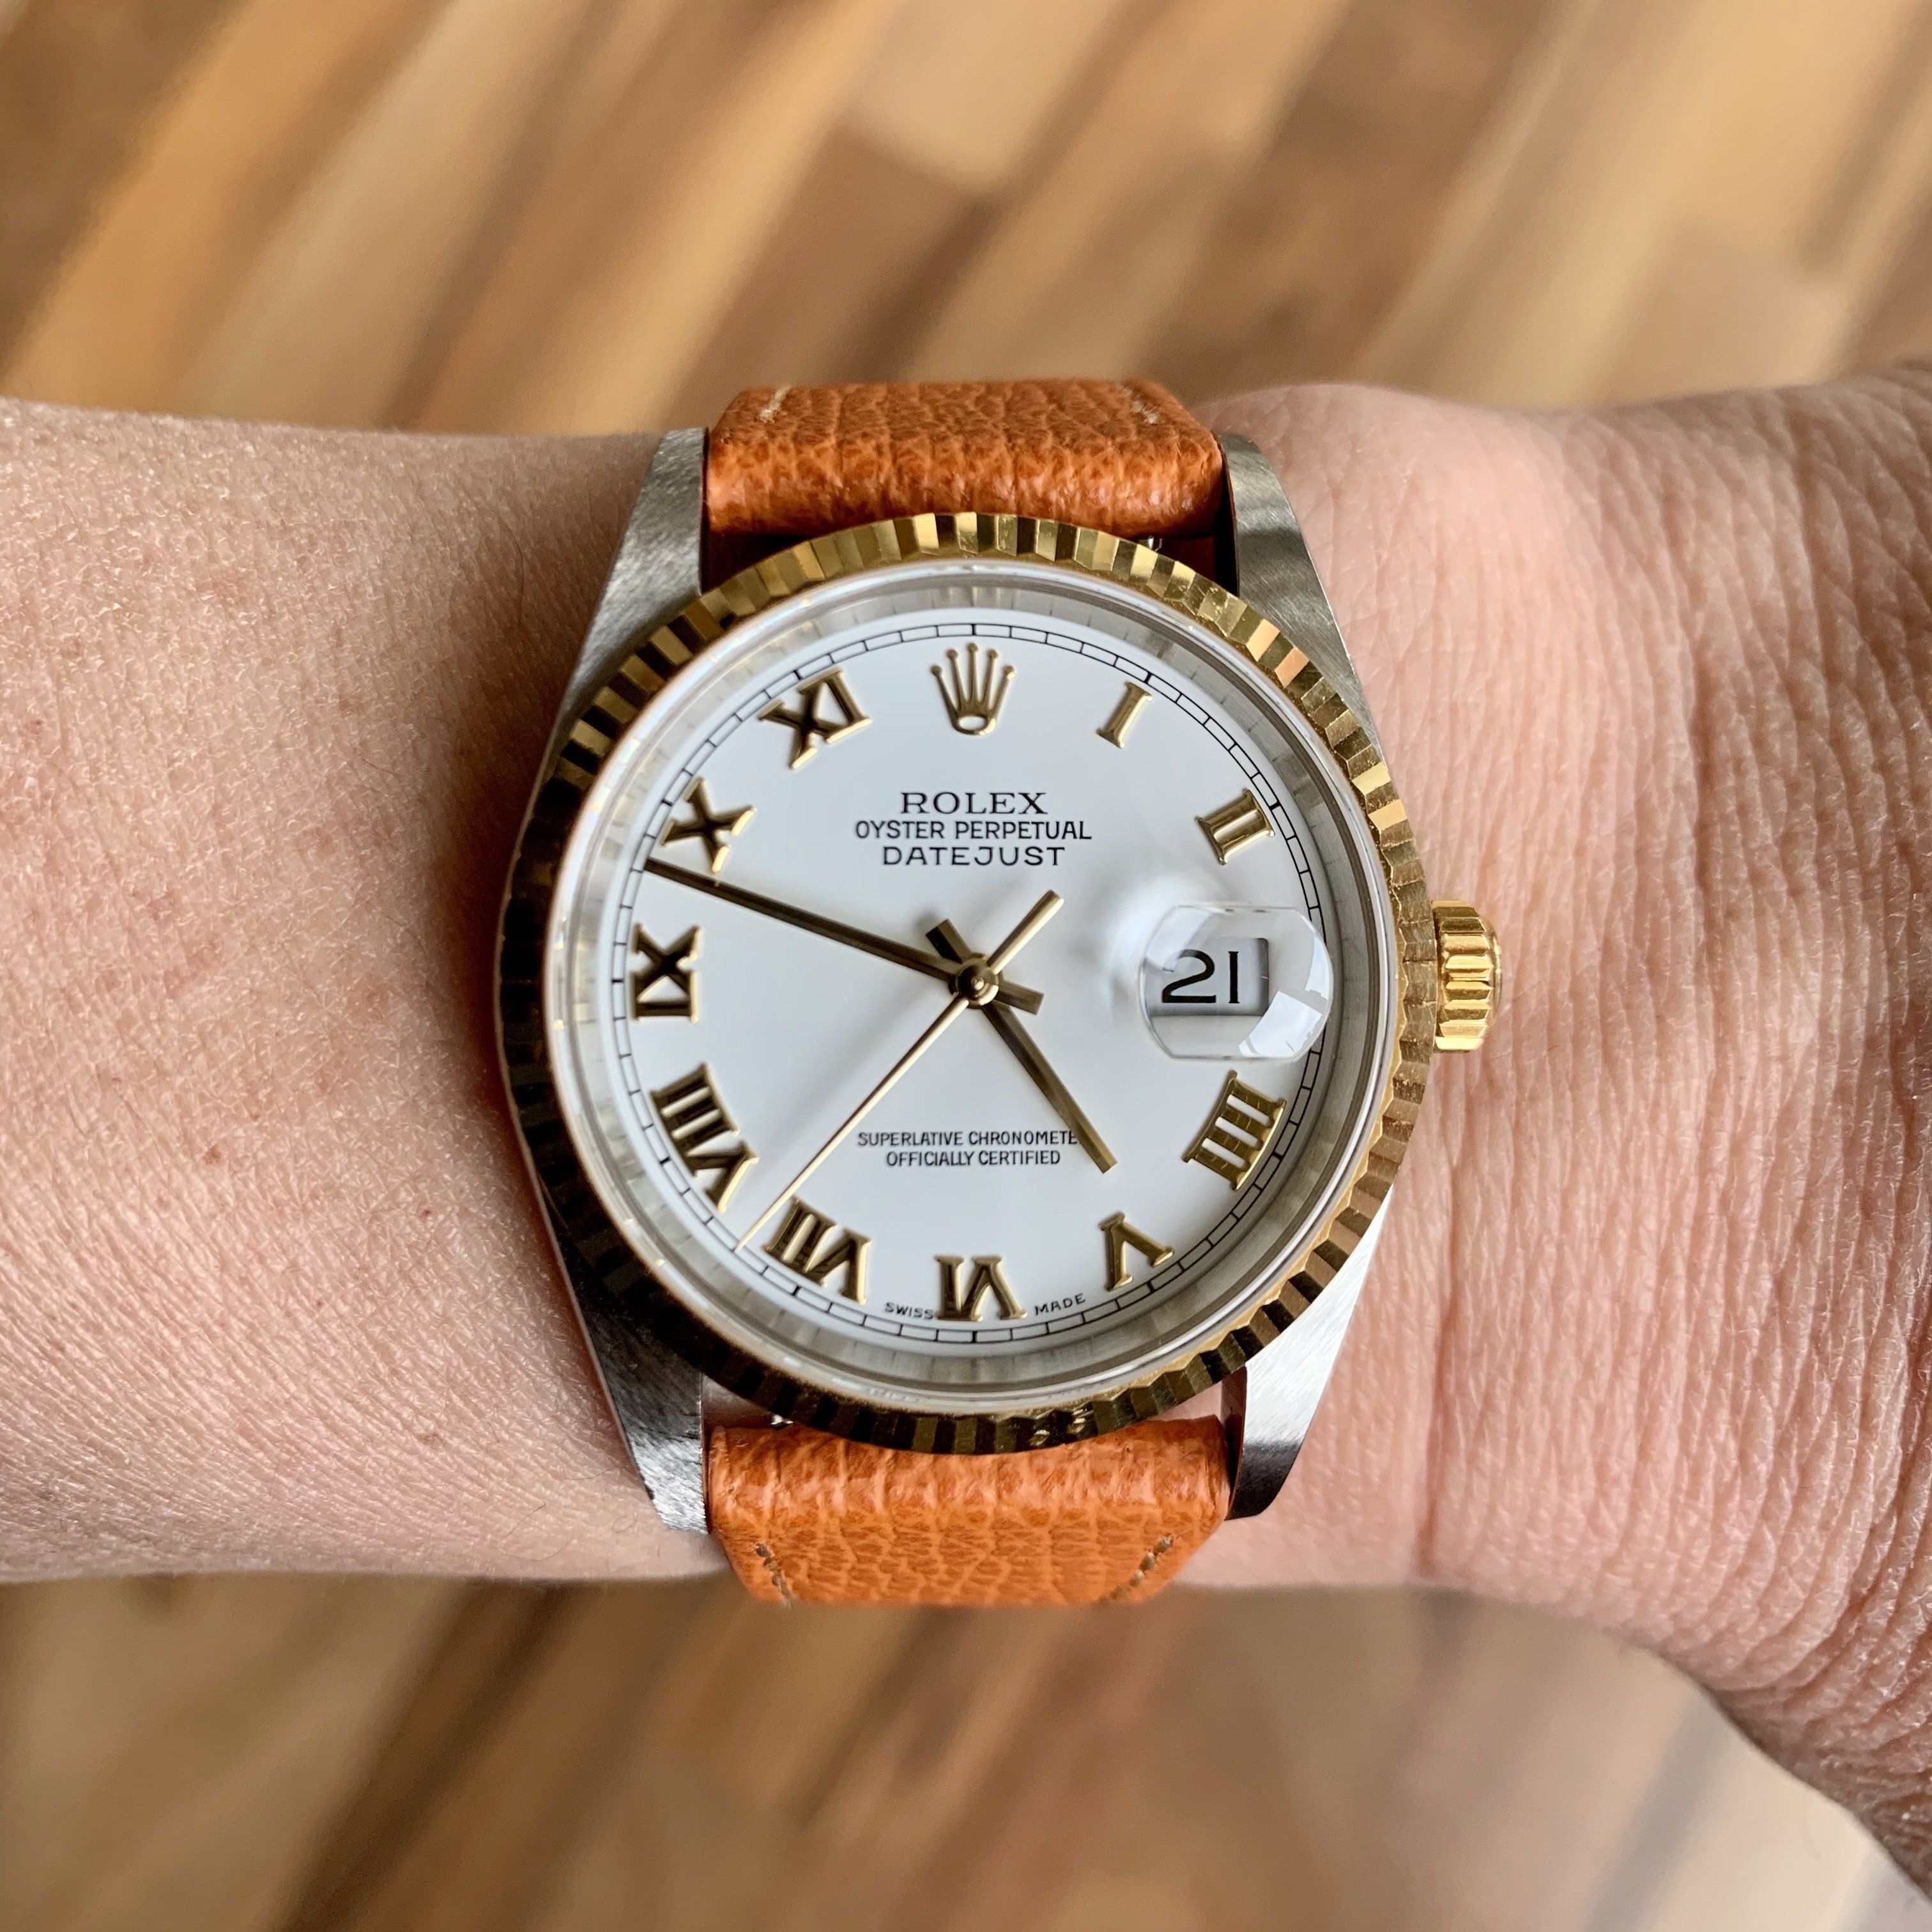 What do you think of this Rolex Datejust on Vario Italian leather? Photo by #varioeveryday member Ben